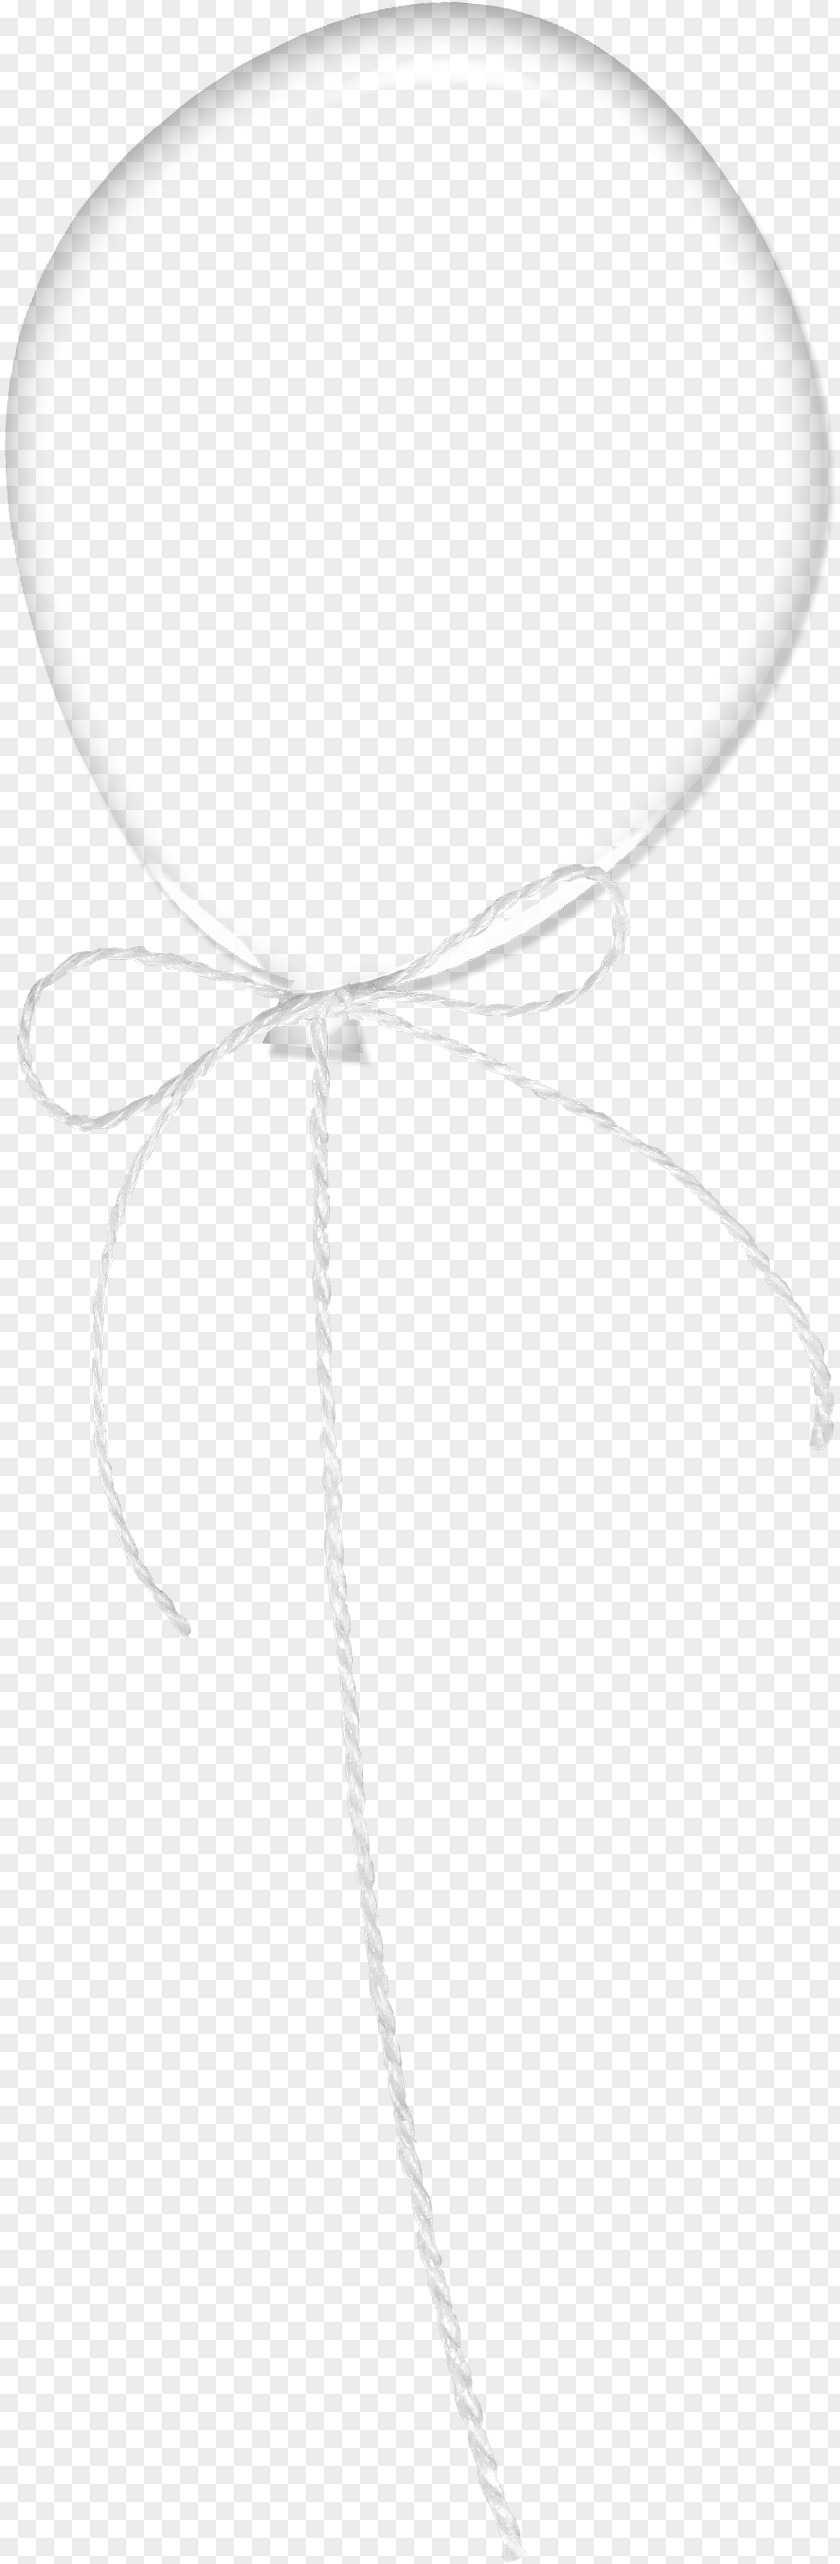 Rope Balloon PNG